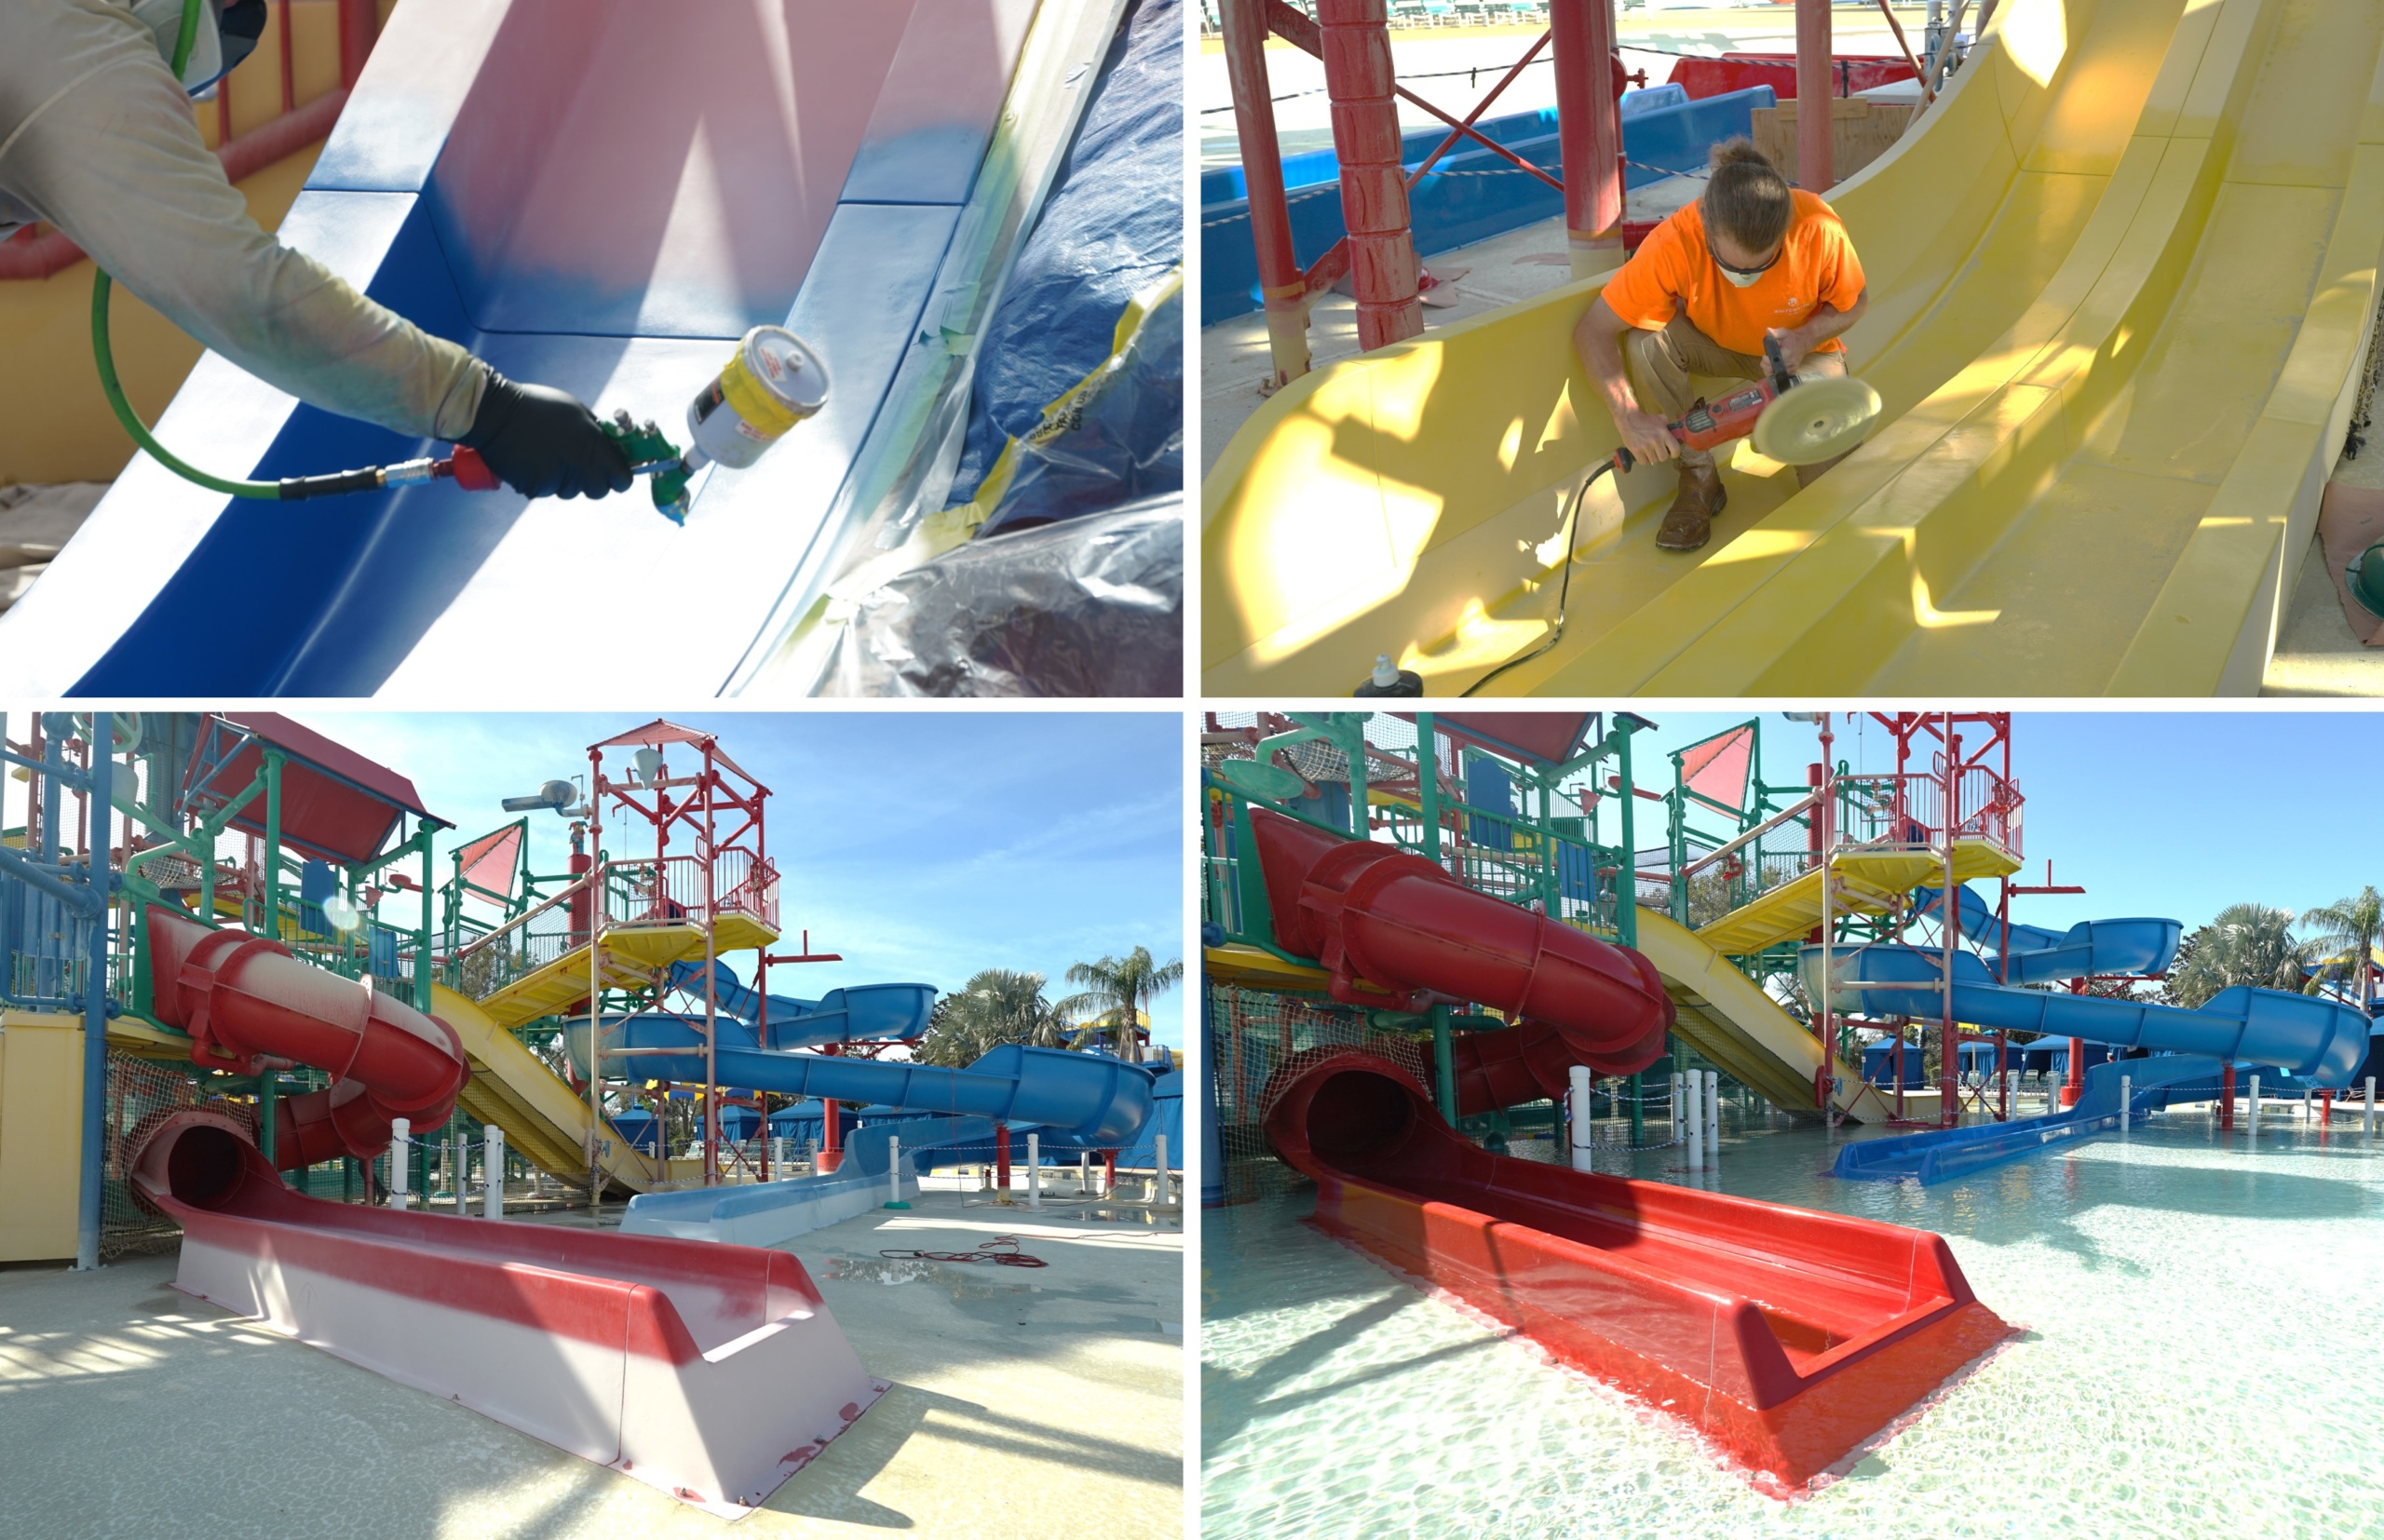 Water slide resurfacing and restoration work before and after comparison